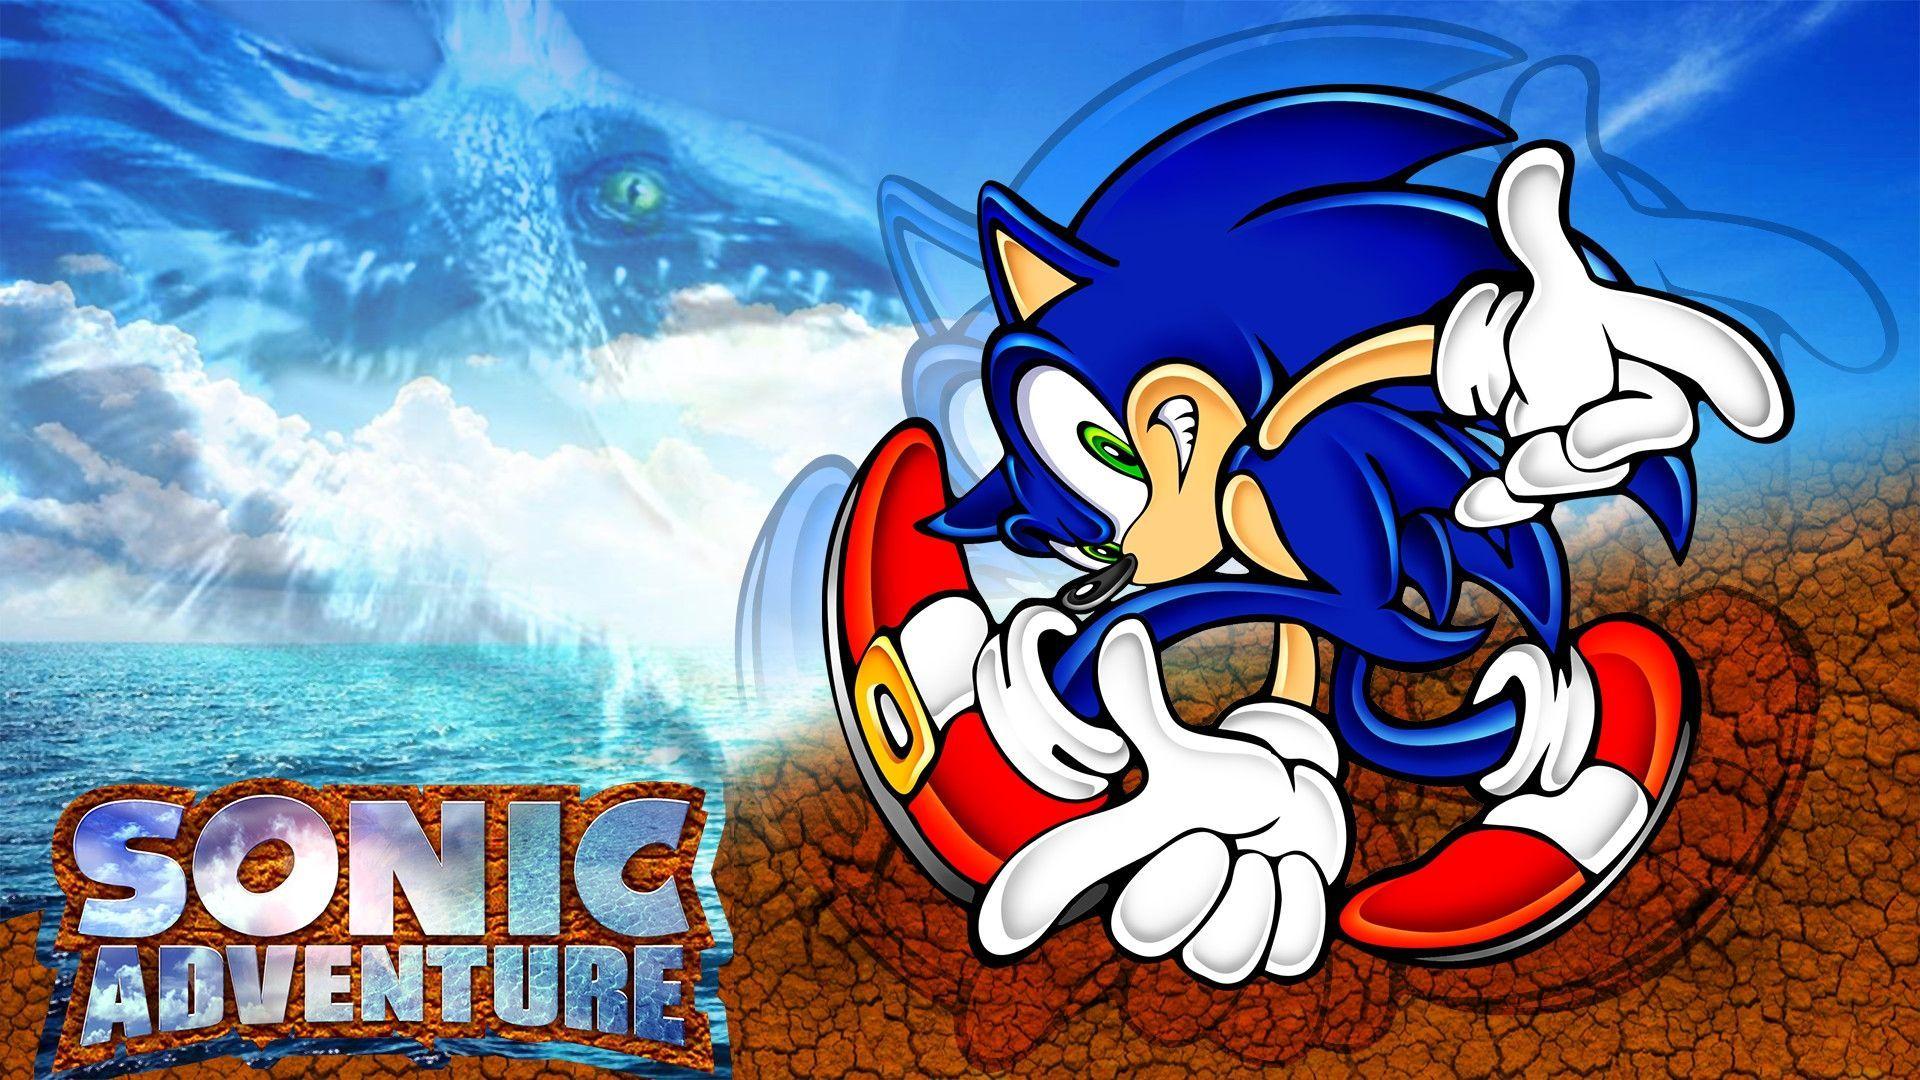 Sonic Adventure Wallpapers Top Free Sonic Adventure Backgrounds Wallpaperaccess